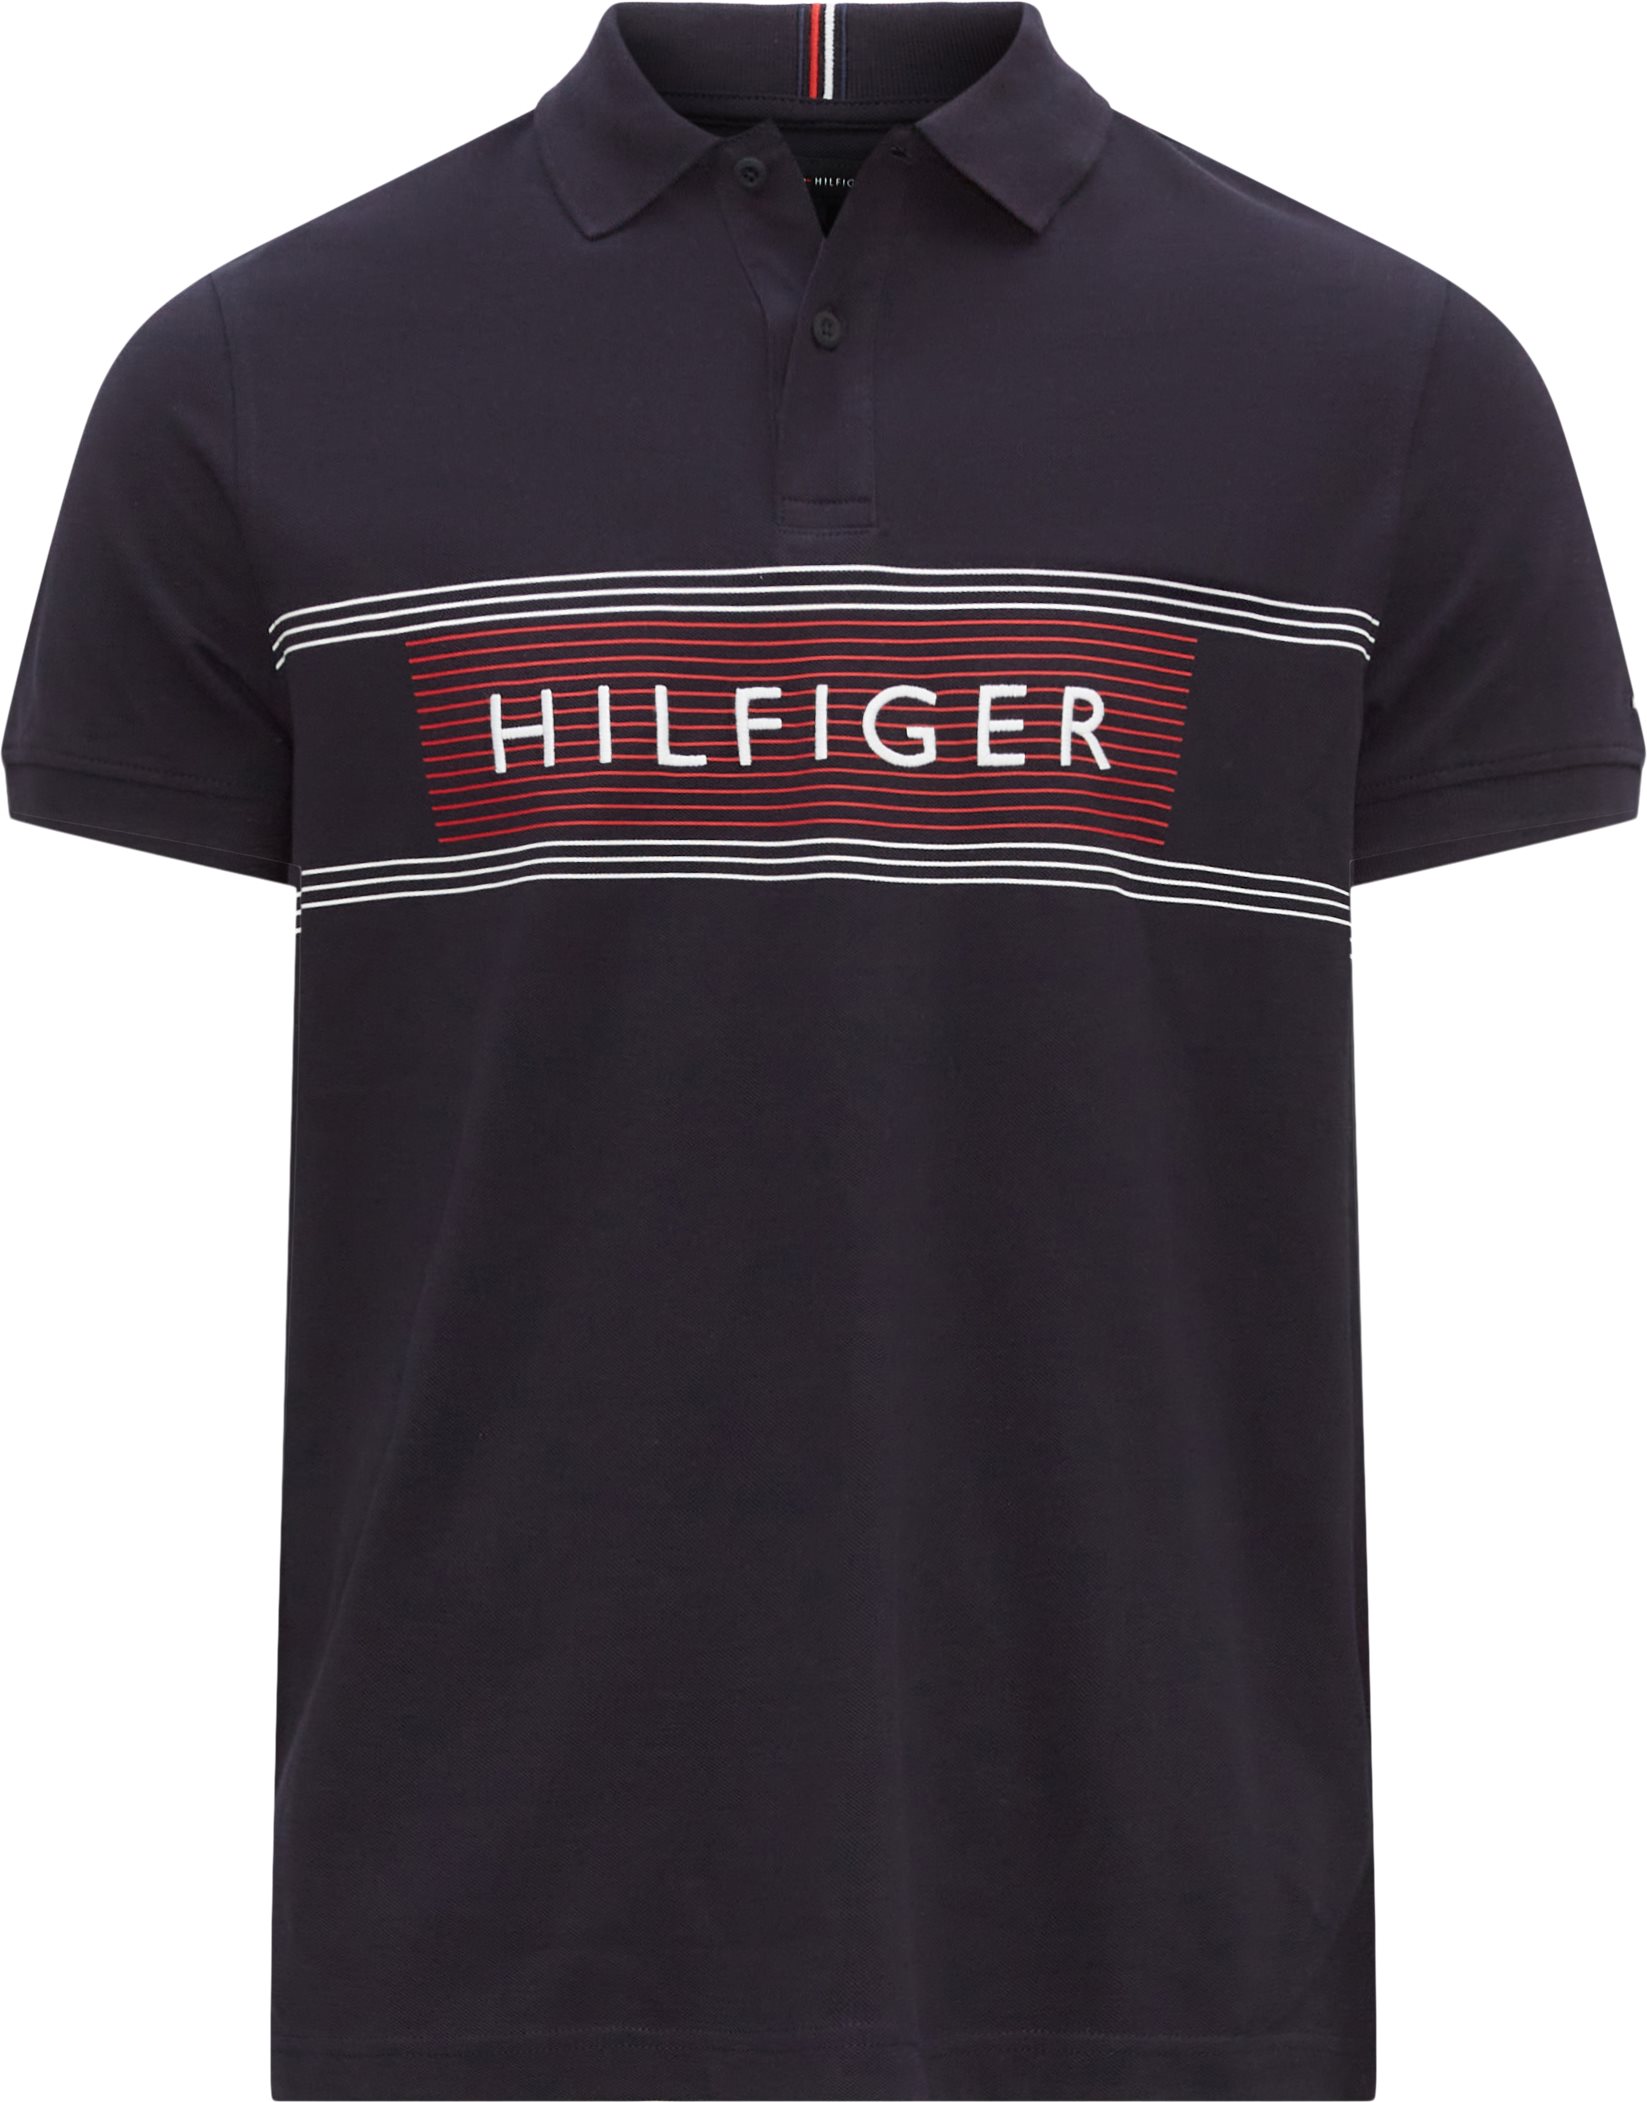 RWB REG 53 Tommy Hilfiger POLO NAVY CHEST EUR 30781 T-shirts from